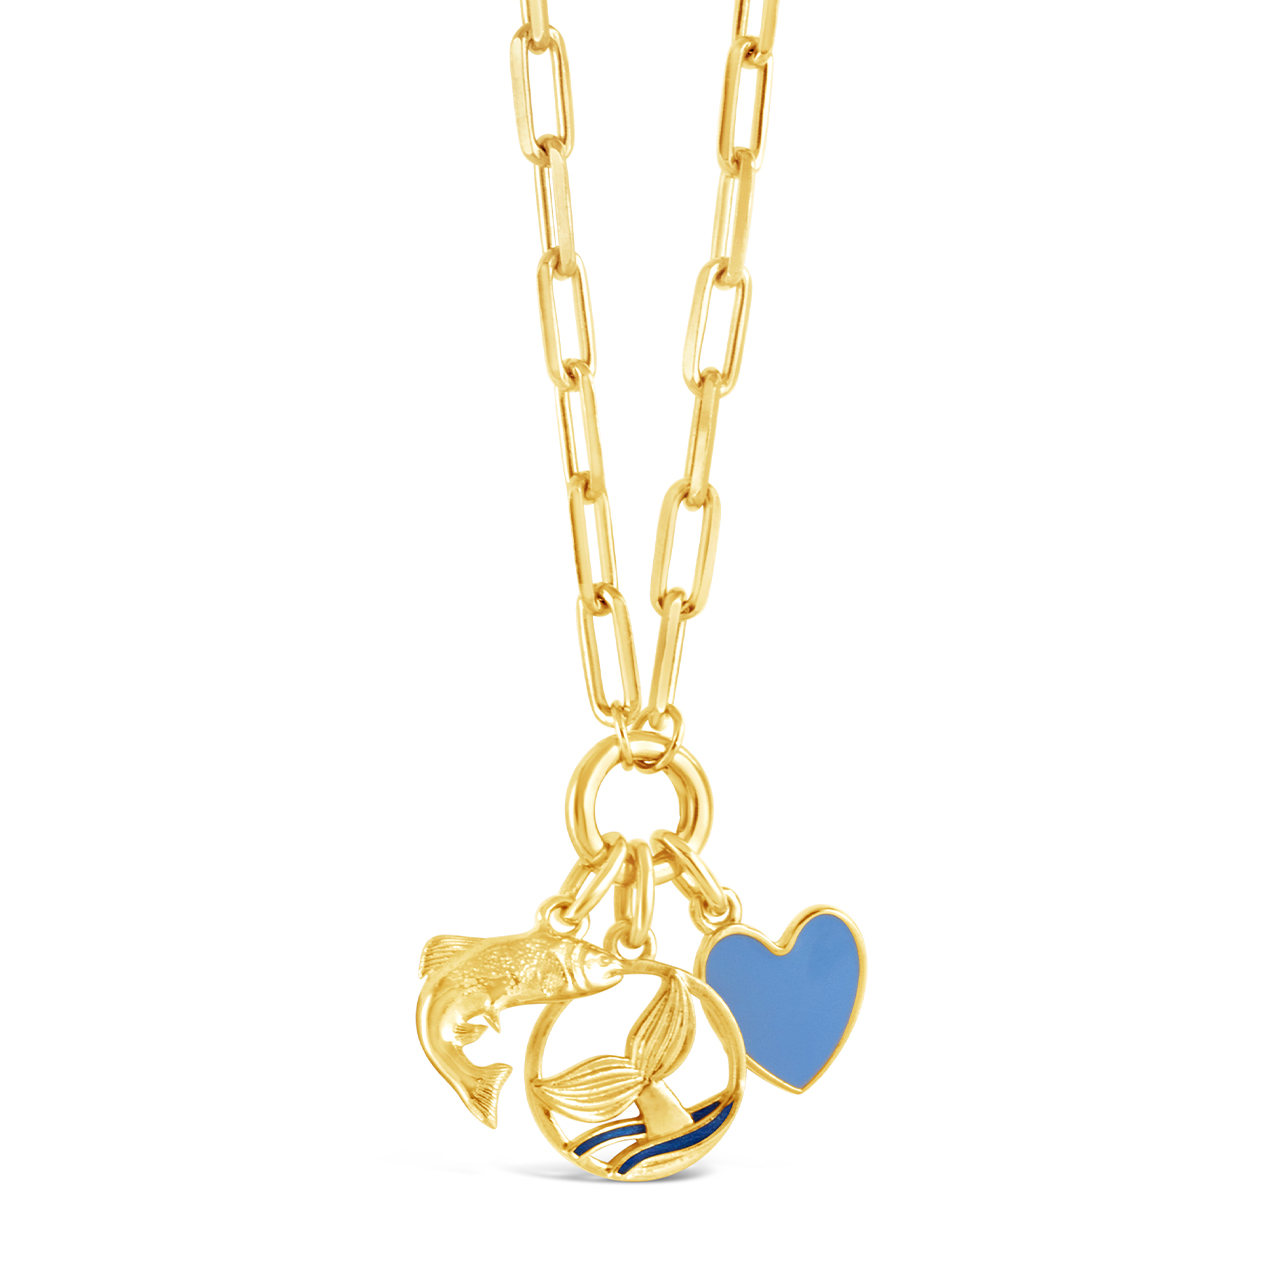 Collectible Travel Treasures™ Charm Holder Necklace - 14k Gold Vermeil